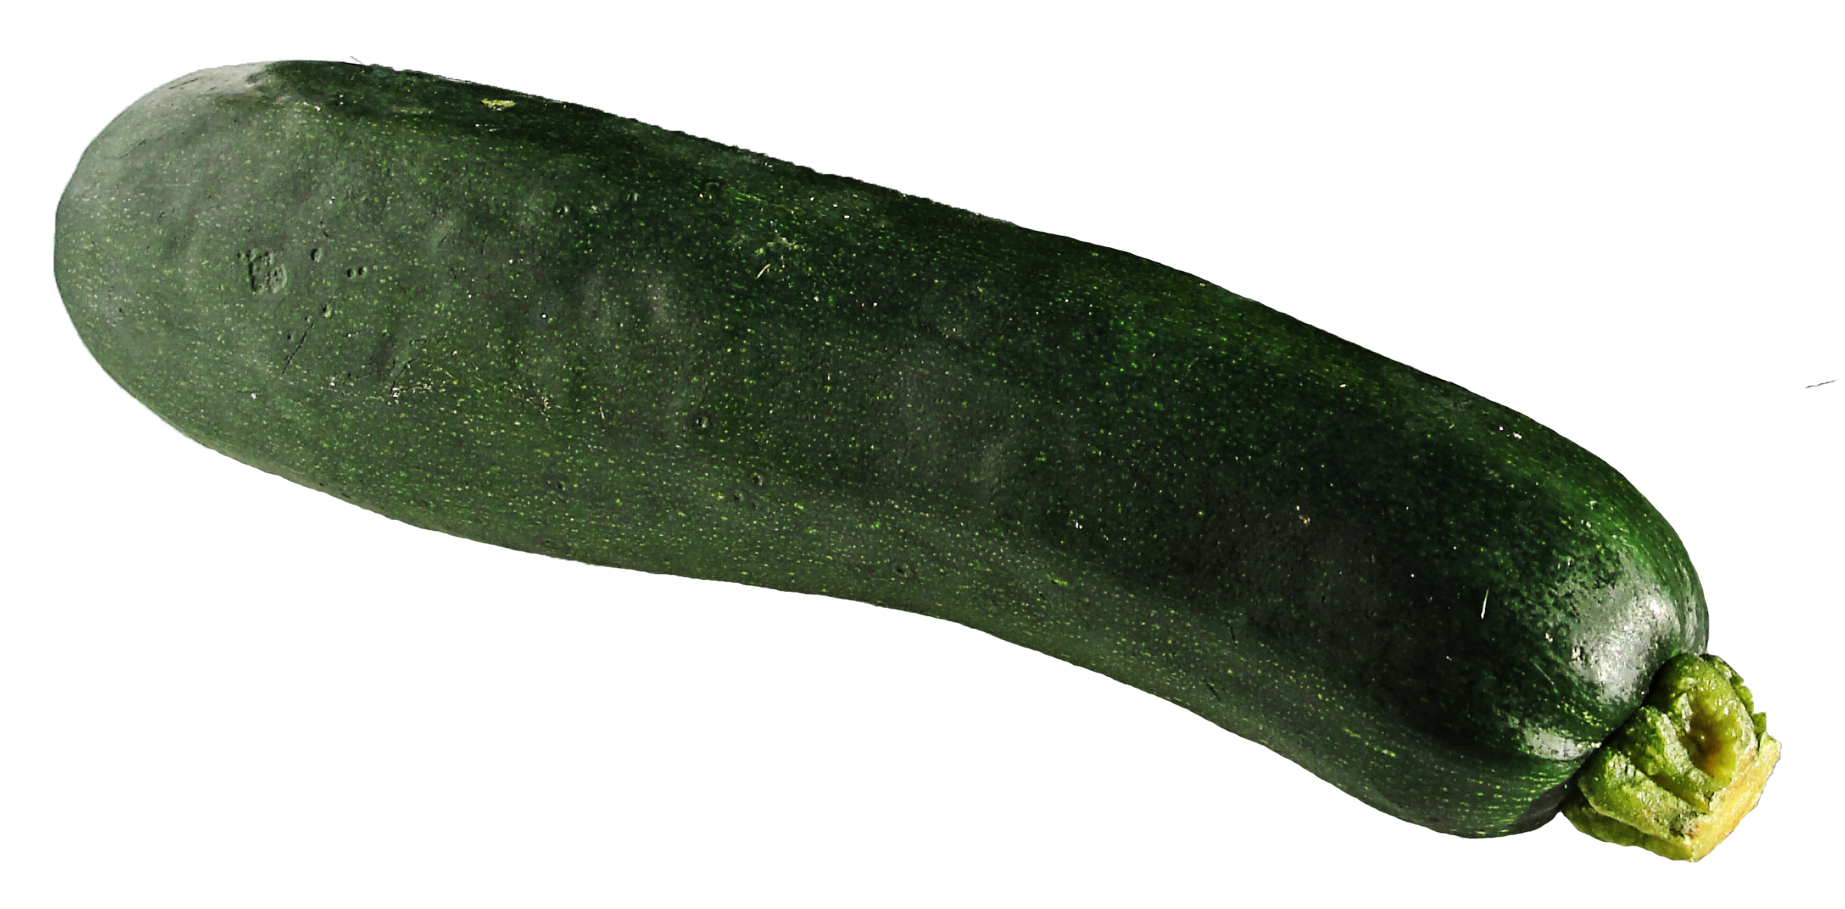 Png image purepng free. Zucchini clipart small